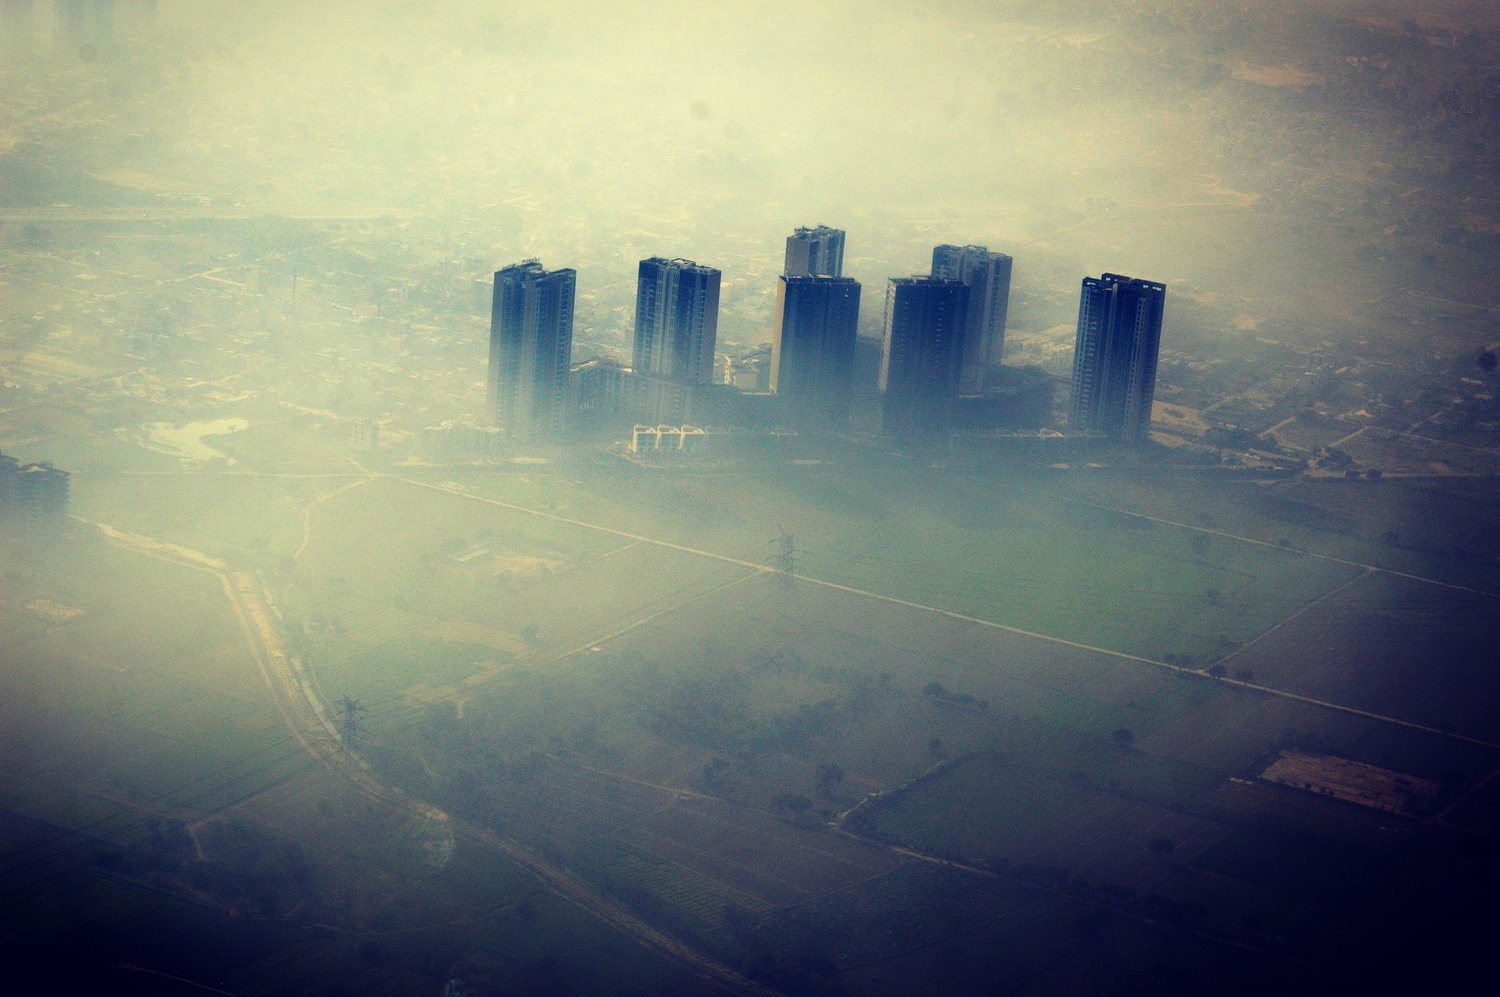 <span style="font-weight: bold;">Delhi's Air in Crisis&nbsp;</span>